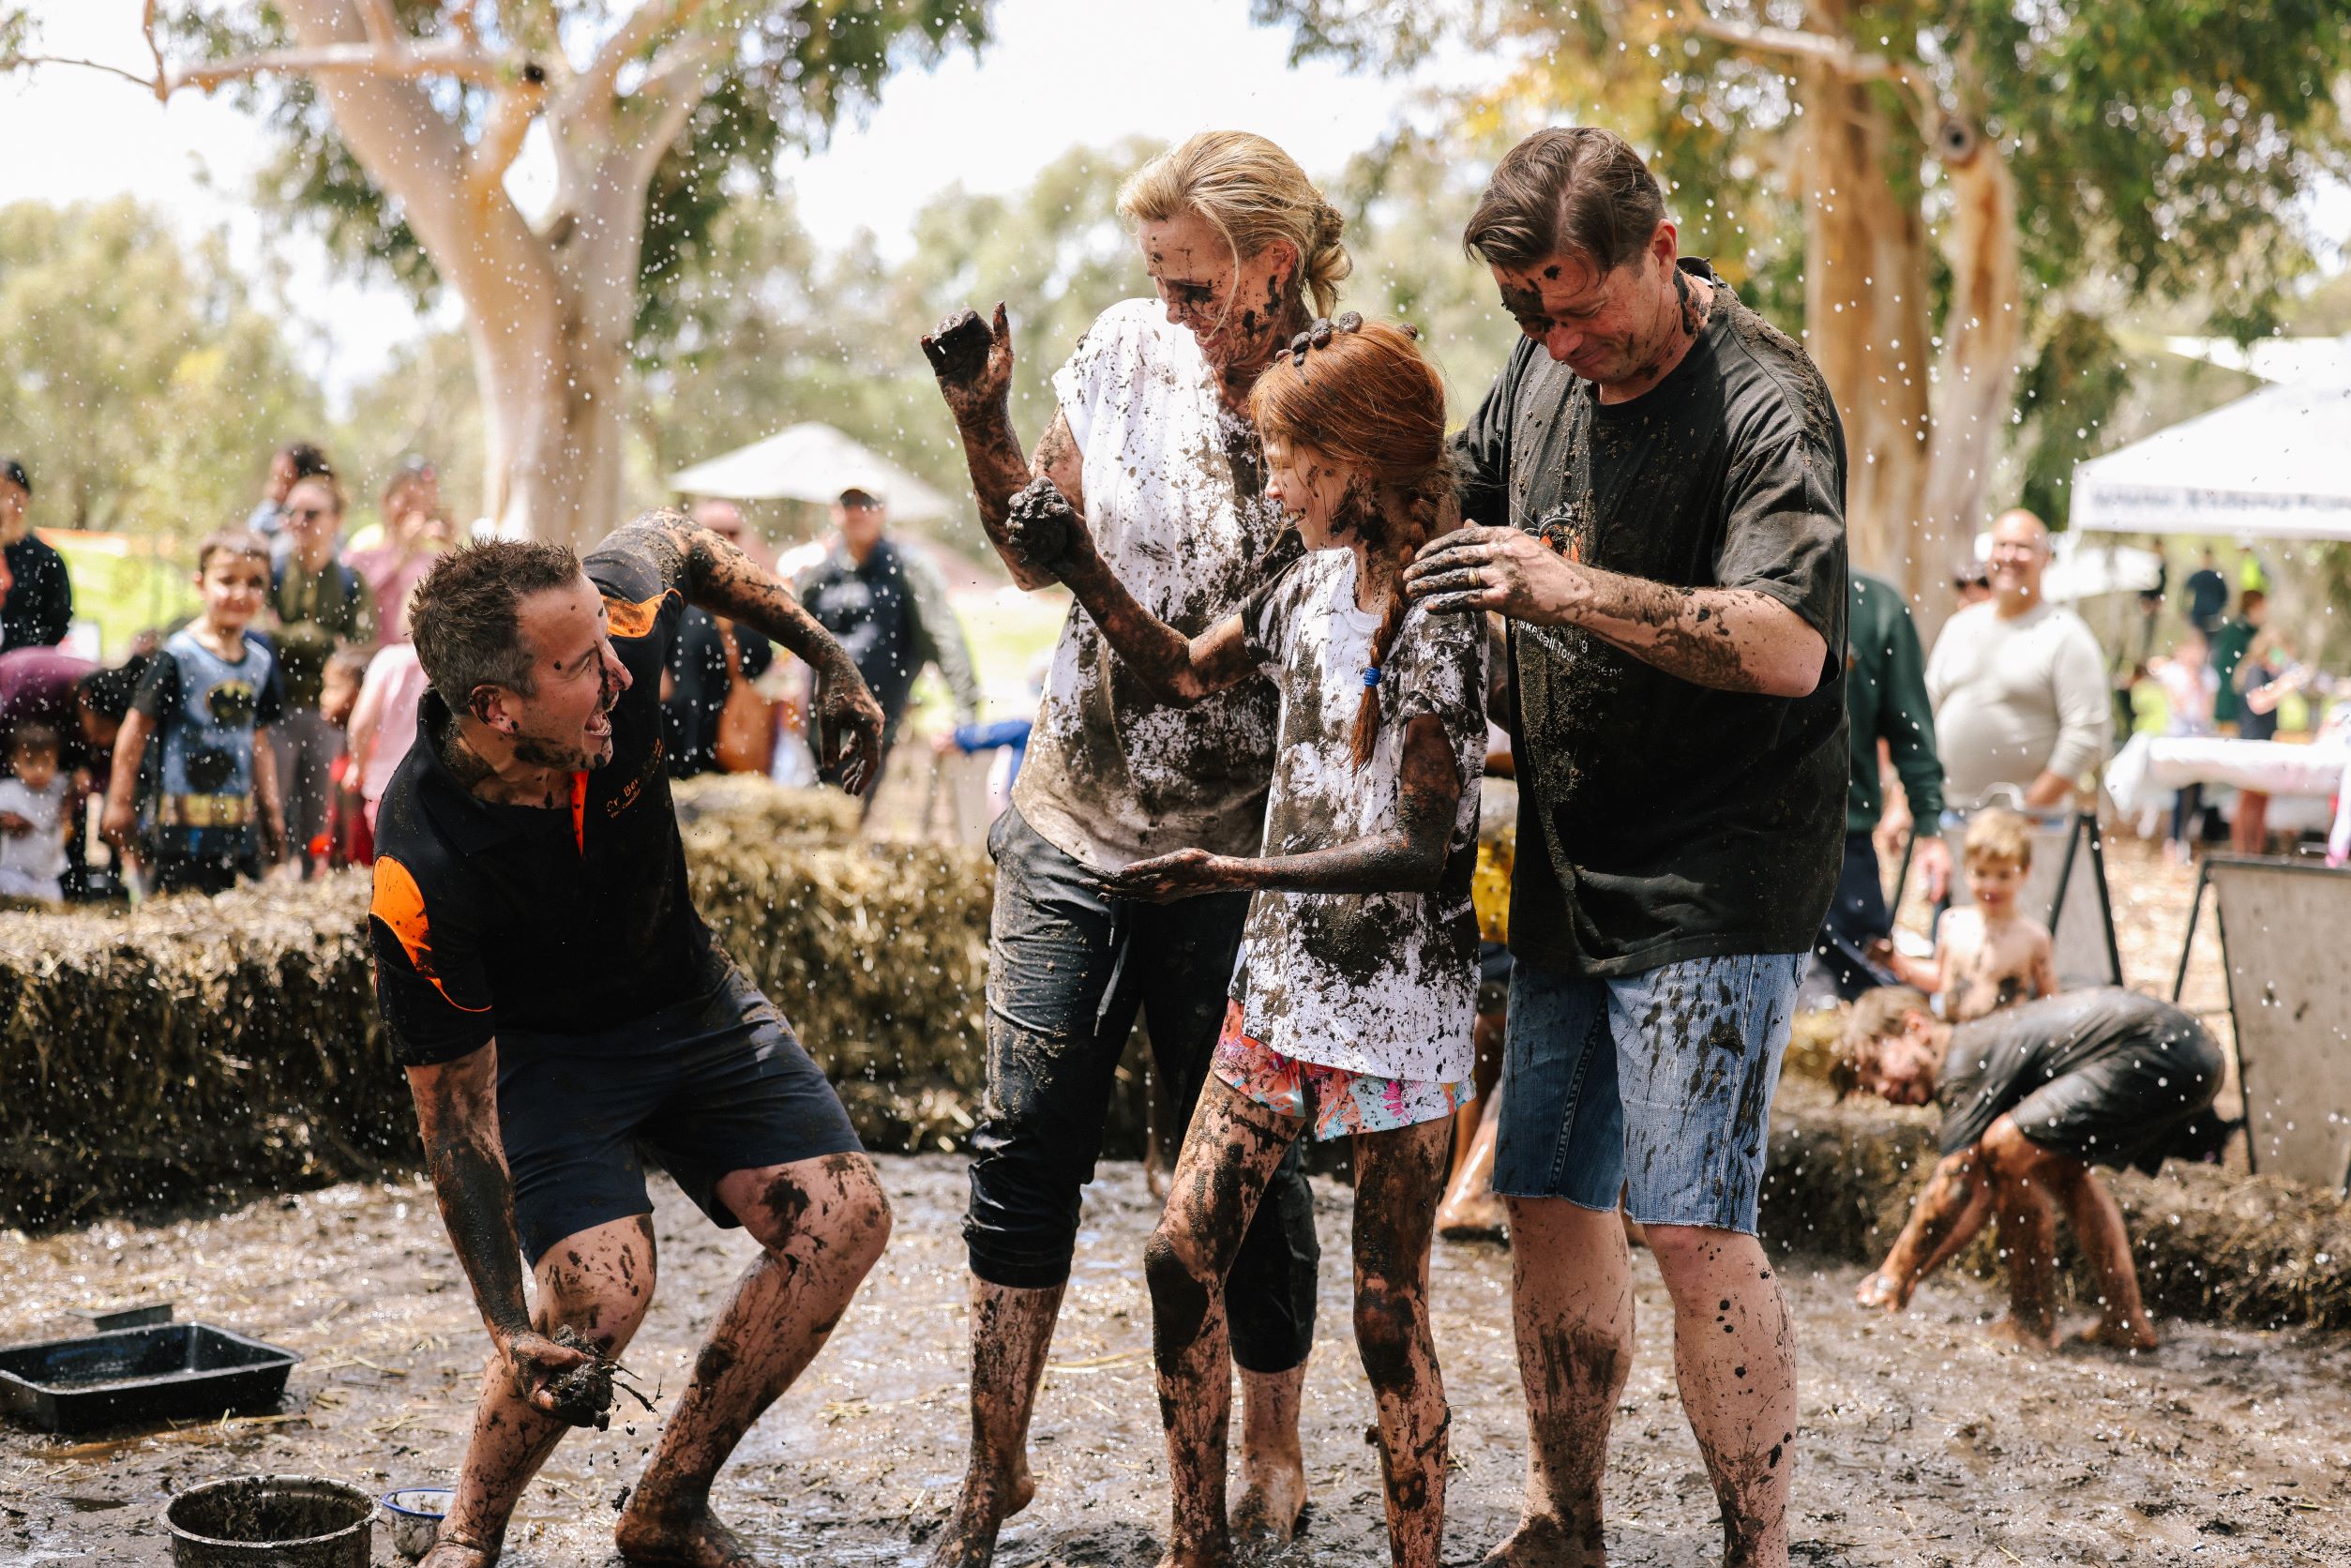 Three adults and one child stand in group in a mud pit. Their clothes are covered in mud. One adult is bending down to scoop up some mud to throw at the others.